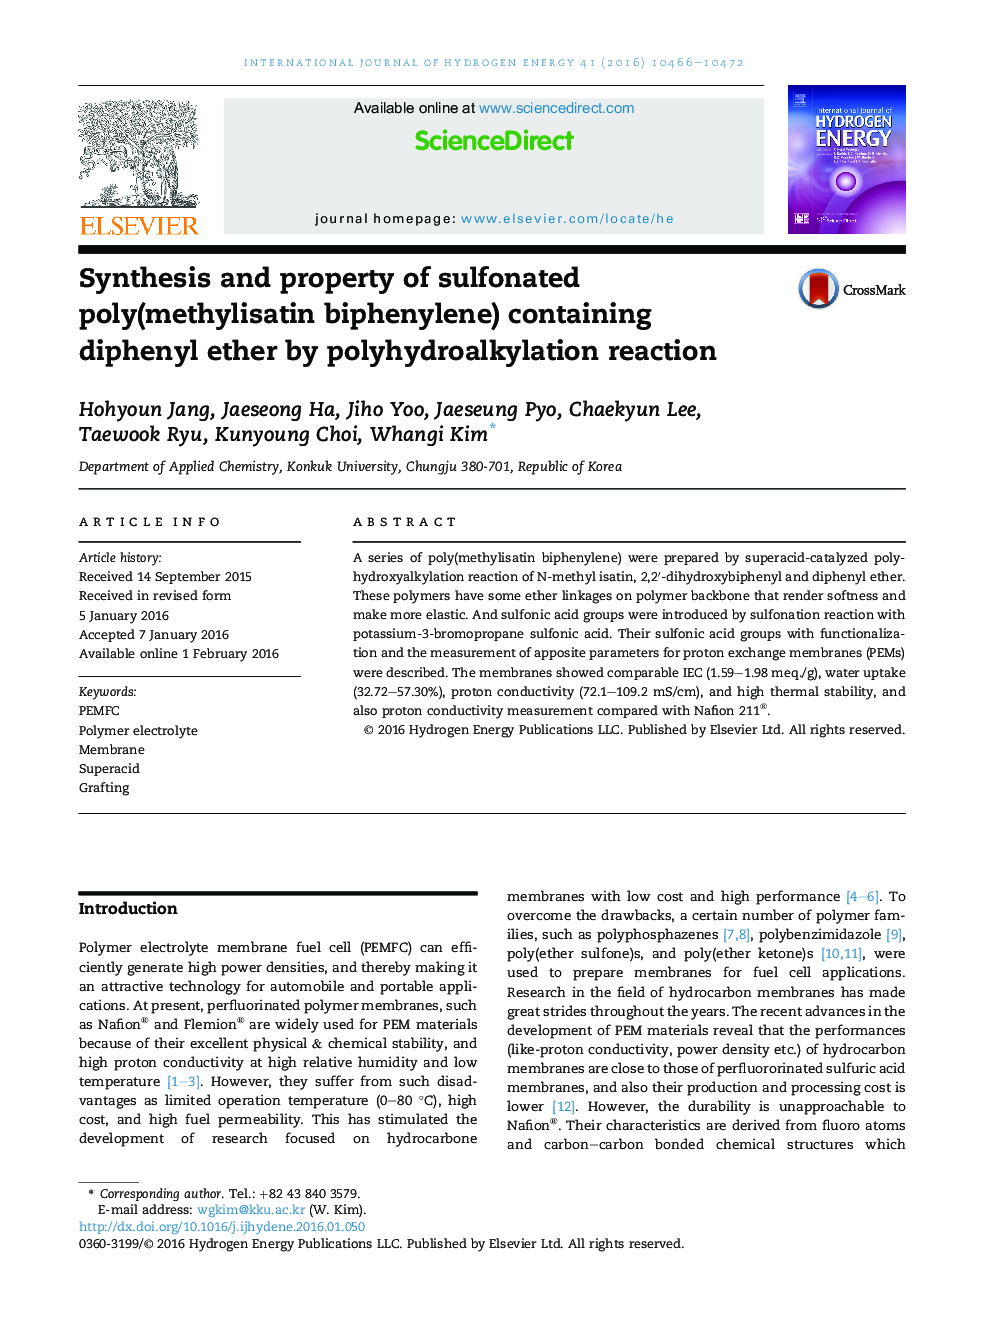 Synthesis and property of sulfonated poly(methylisatin biphenylene) containing diphenyl ether by polyhydroalkylation reaction